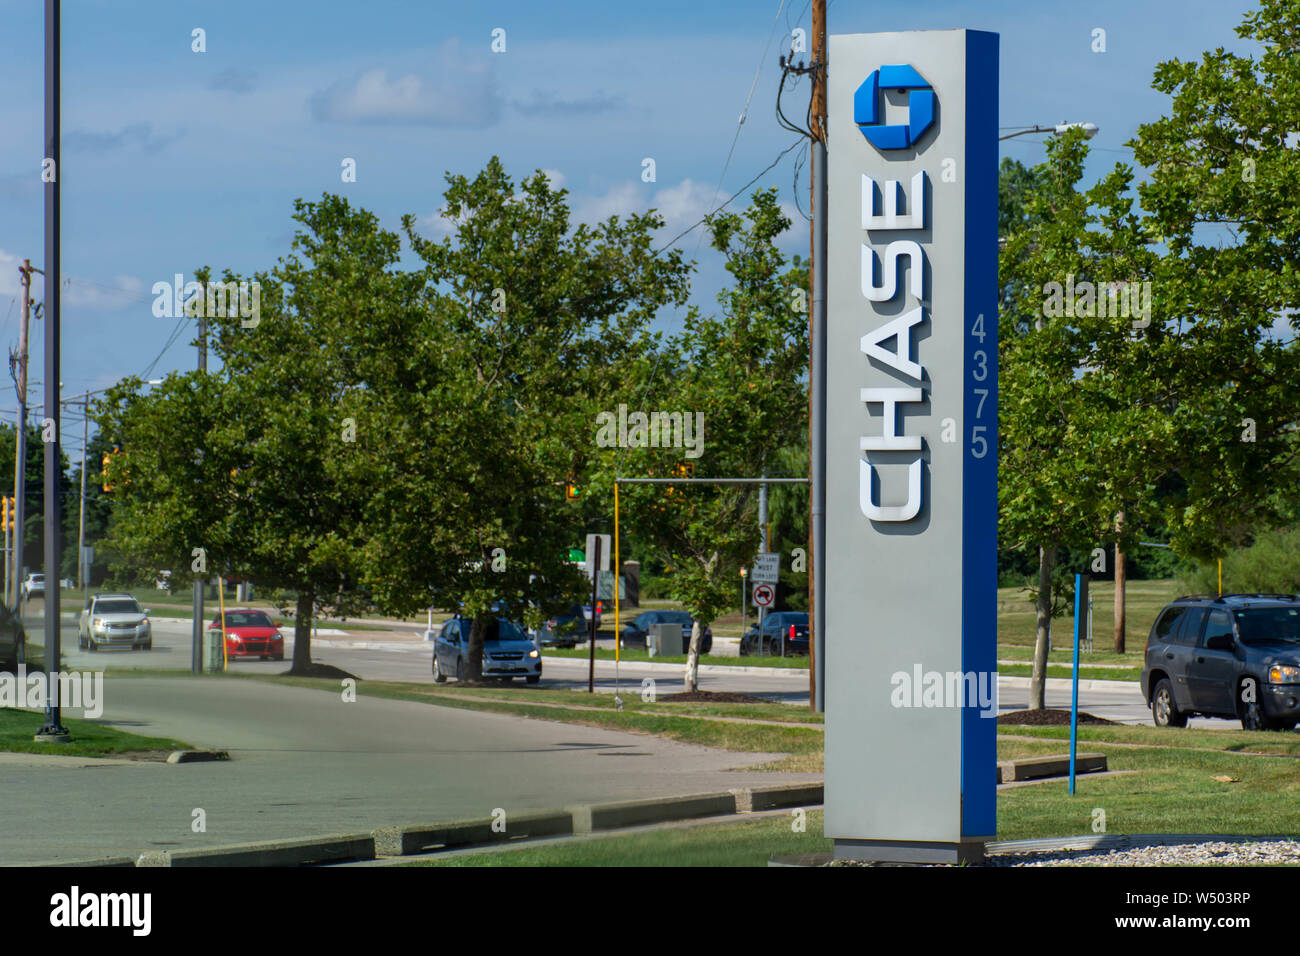 'Grand Rapids, Michigan/United States of America - 07/17/2019: Blue Chase Bank Sign with drive thru, atm and flowers on green grass and blue sky.' Stock Photo